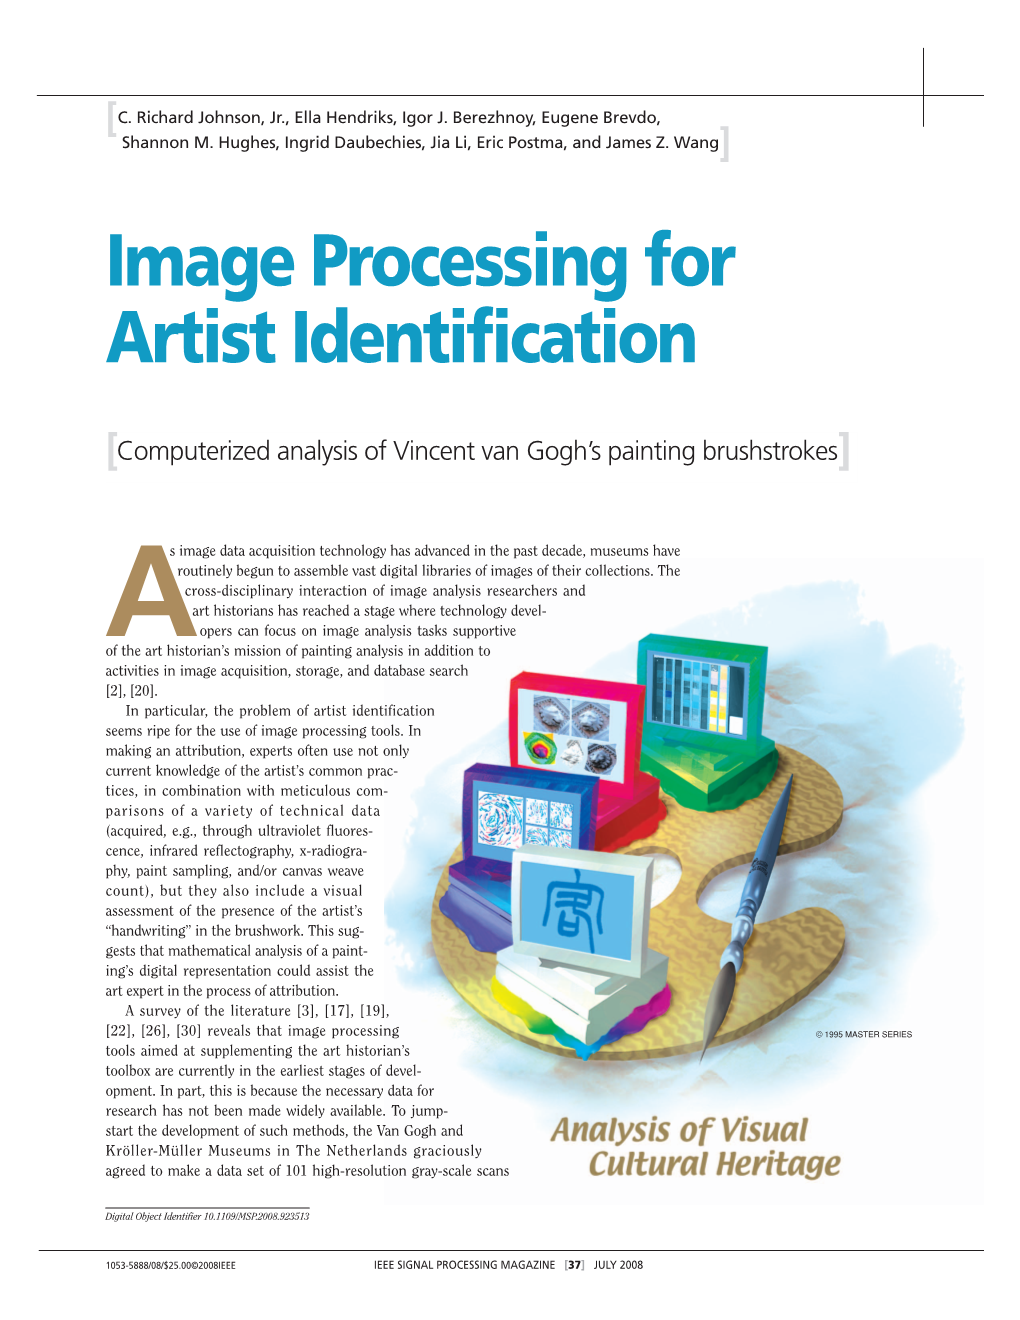 Image Processing for Artist Identification